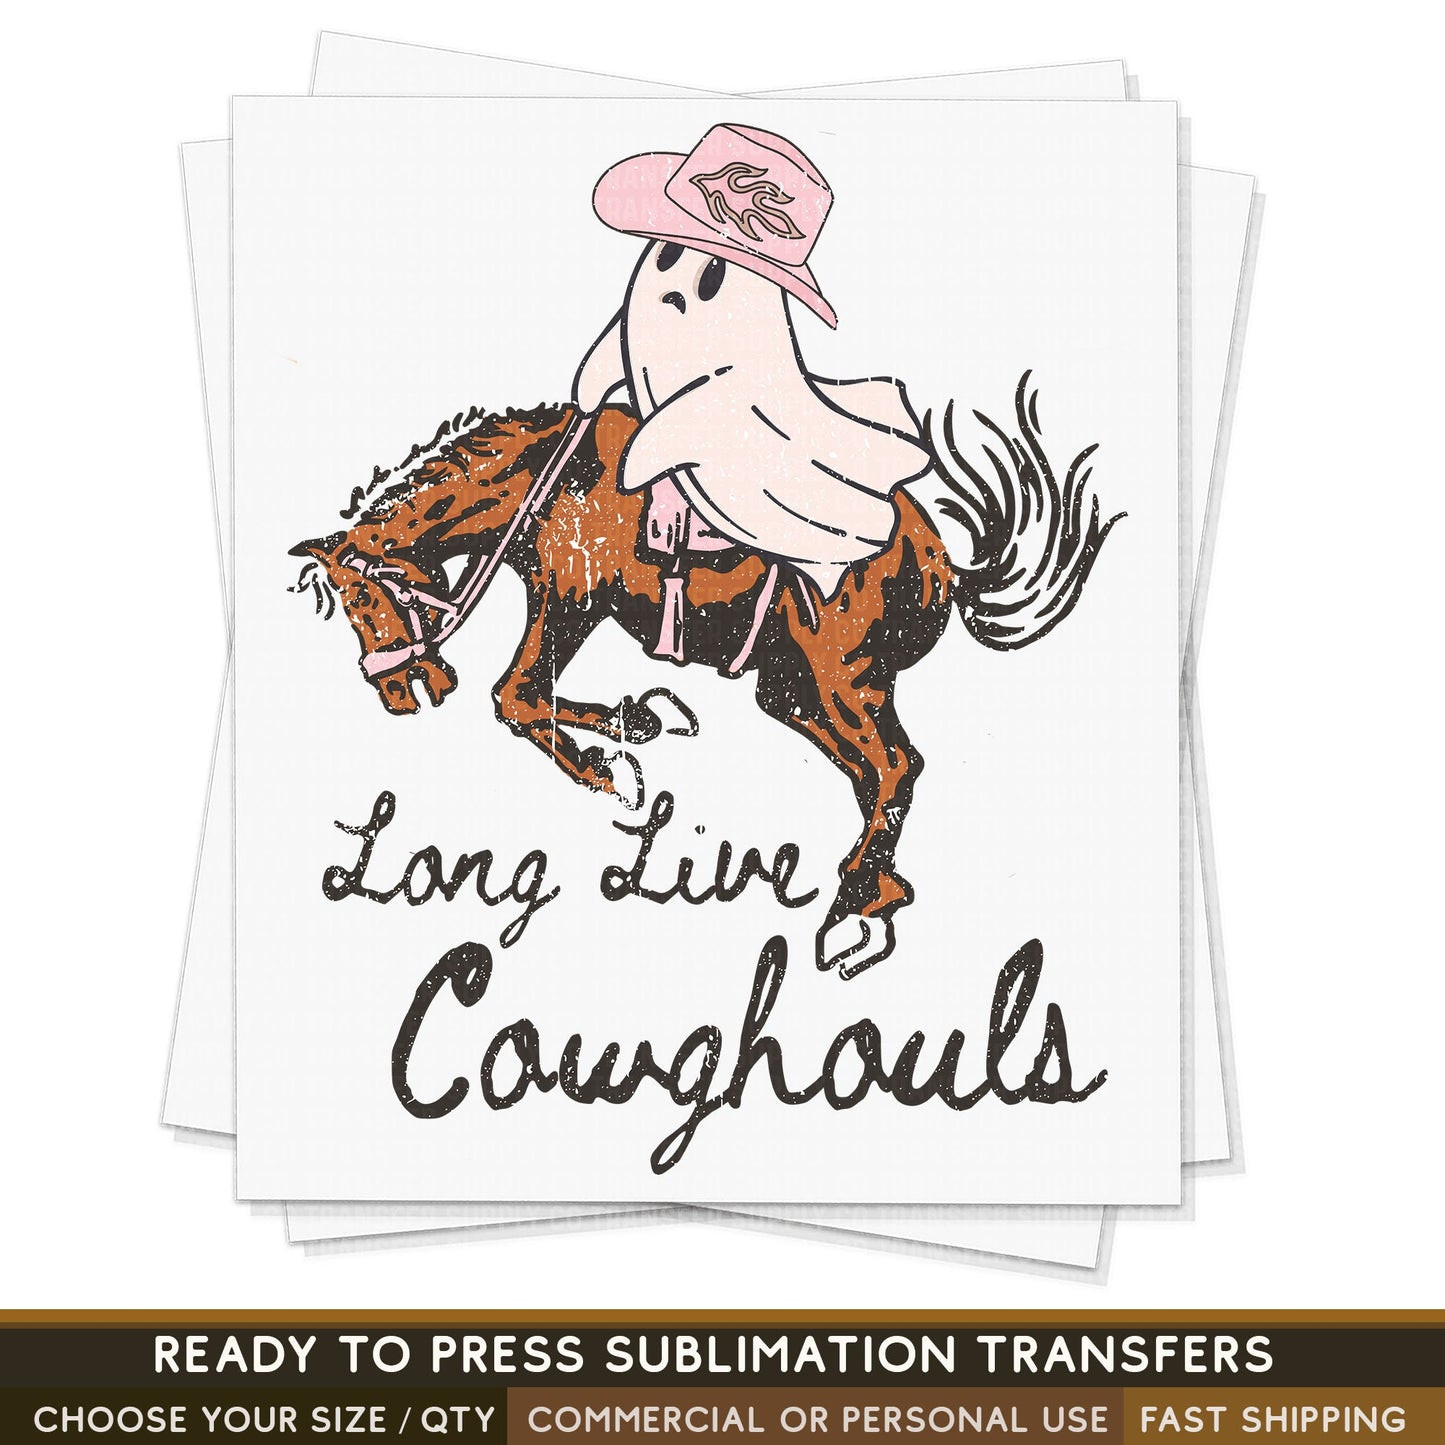 Long Live Cowghouls, Cowgirl Ghost, Western Halloween, Ready To Press Sublimations, Ready To Press Transfers, Sublimation Prints,